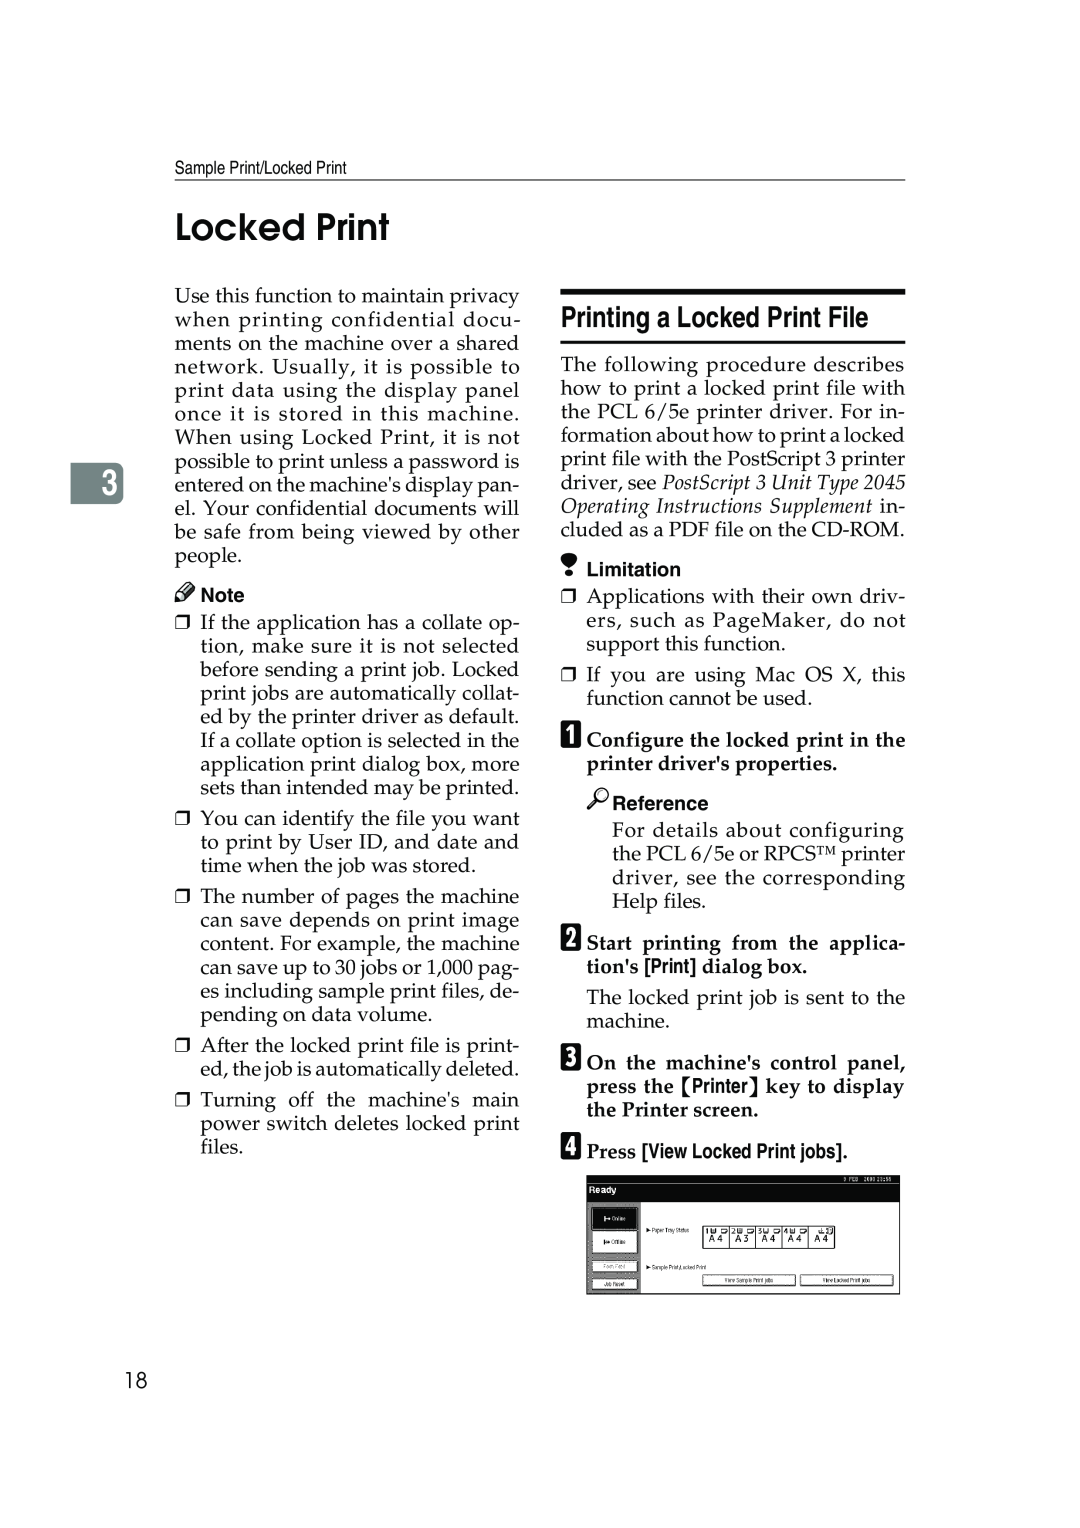 Xerox 2045e Printing a Locked Print File, A Configure the locked print in the printer drivers properties, Limitation 